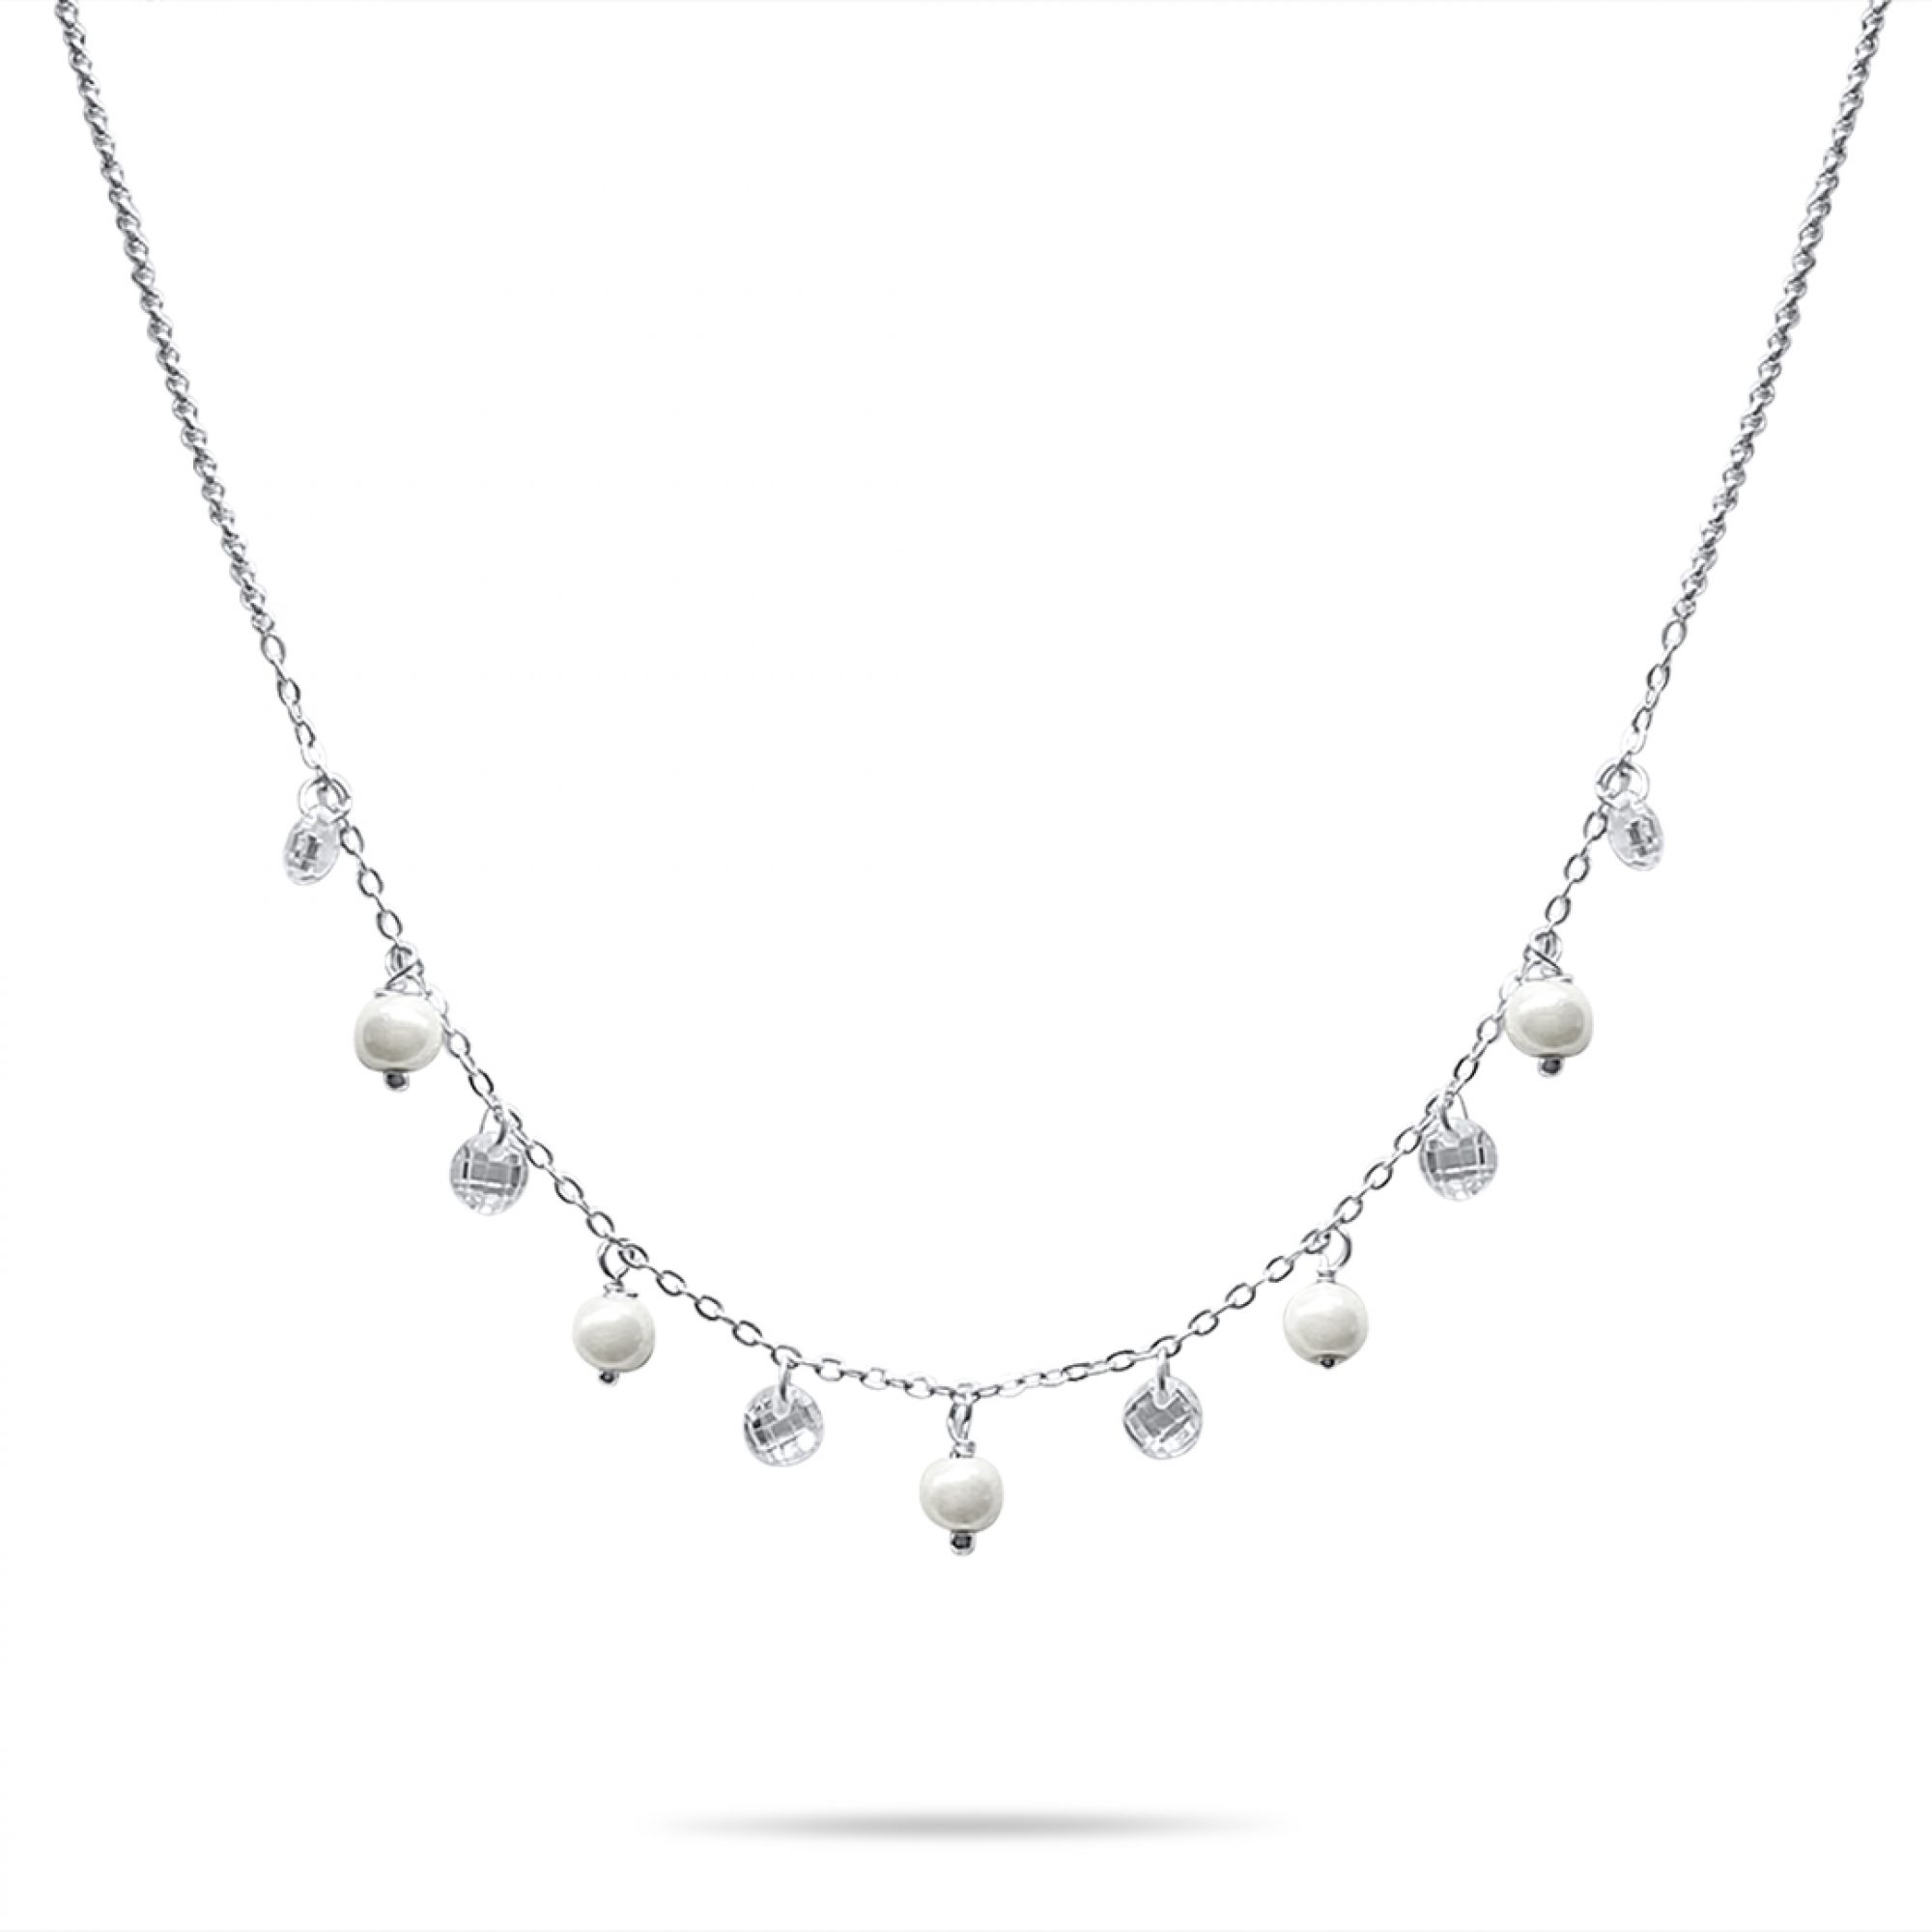 Necklace with zircon stones and pearls